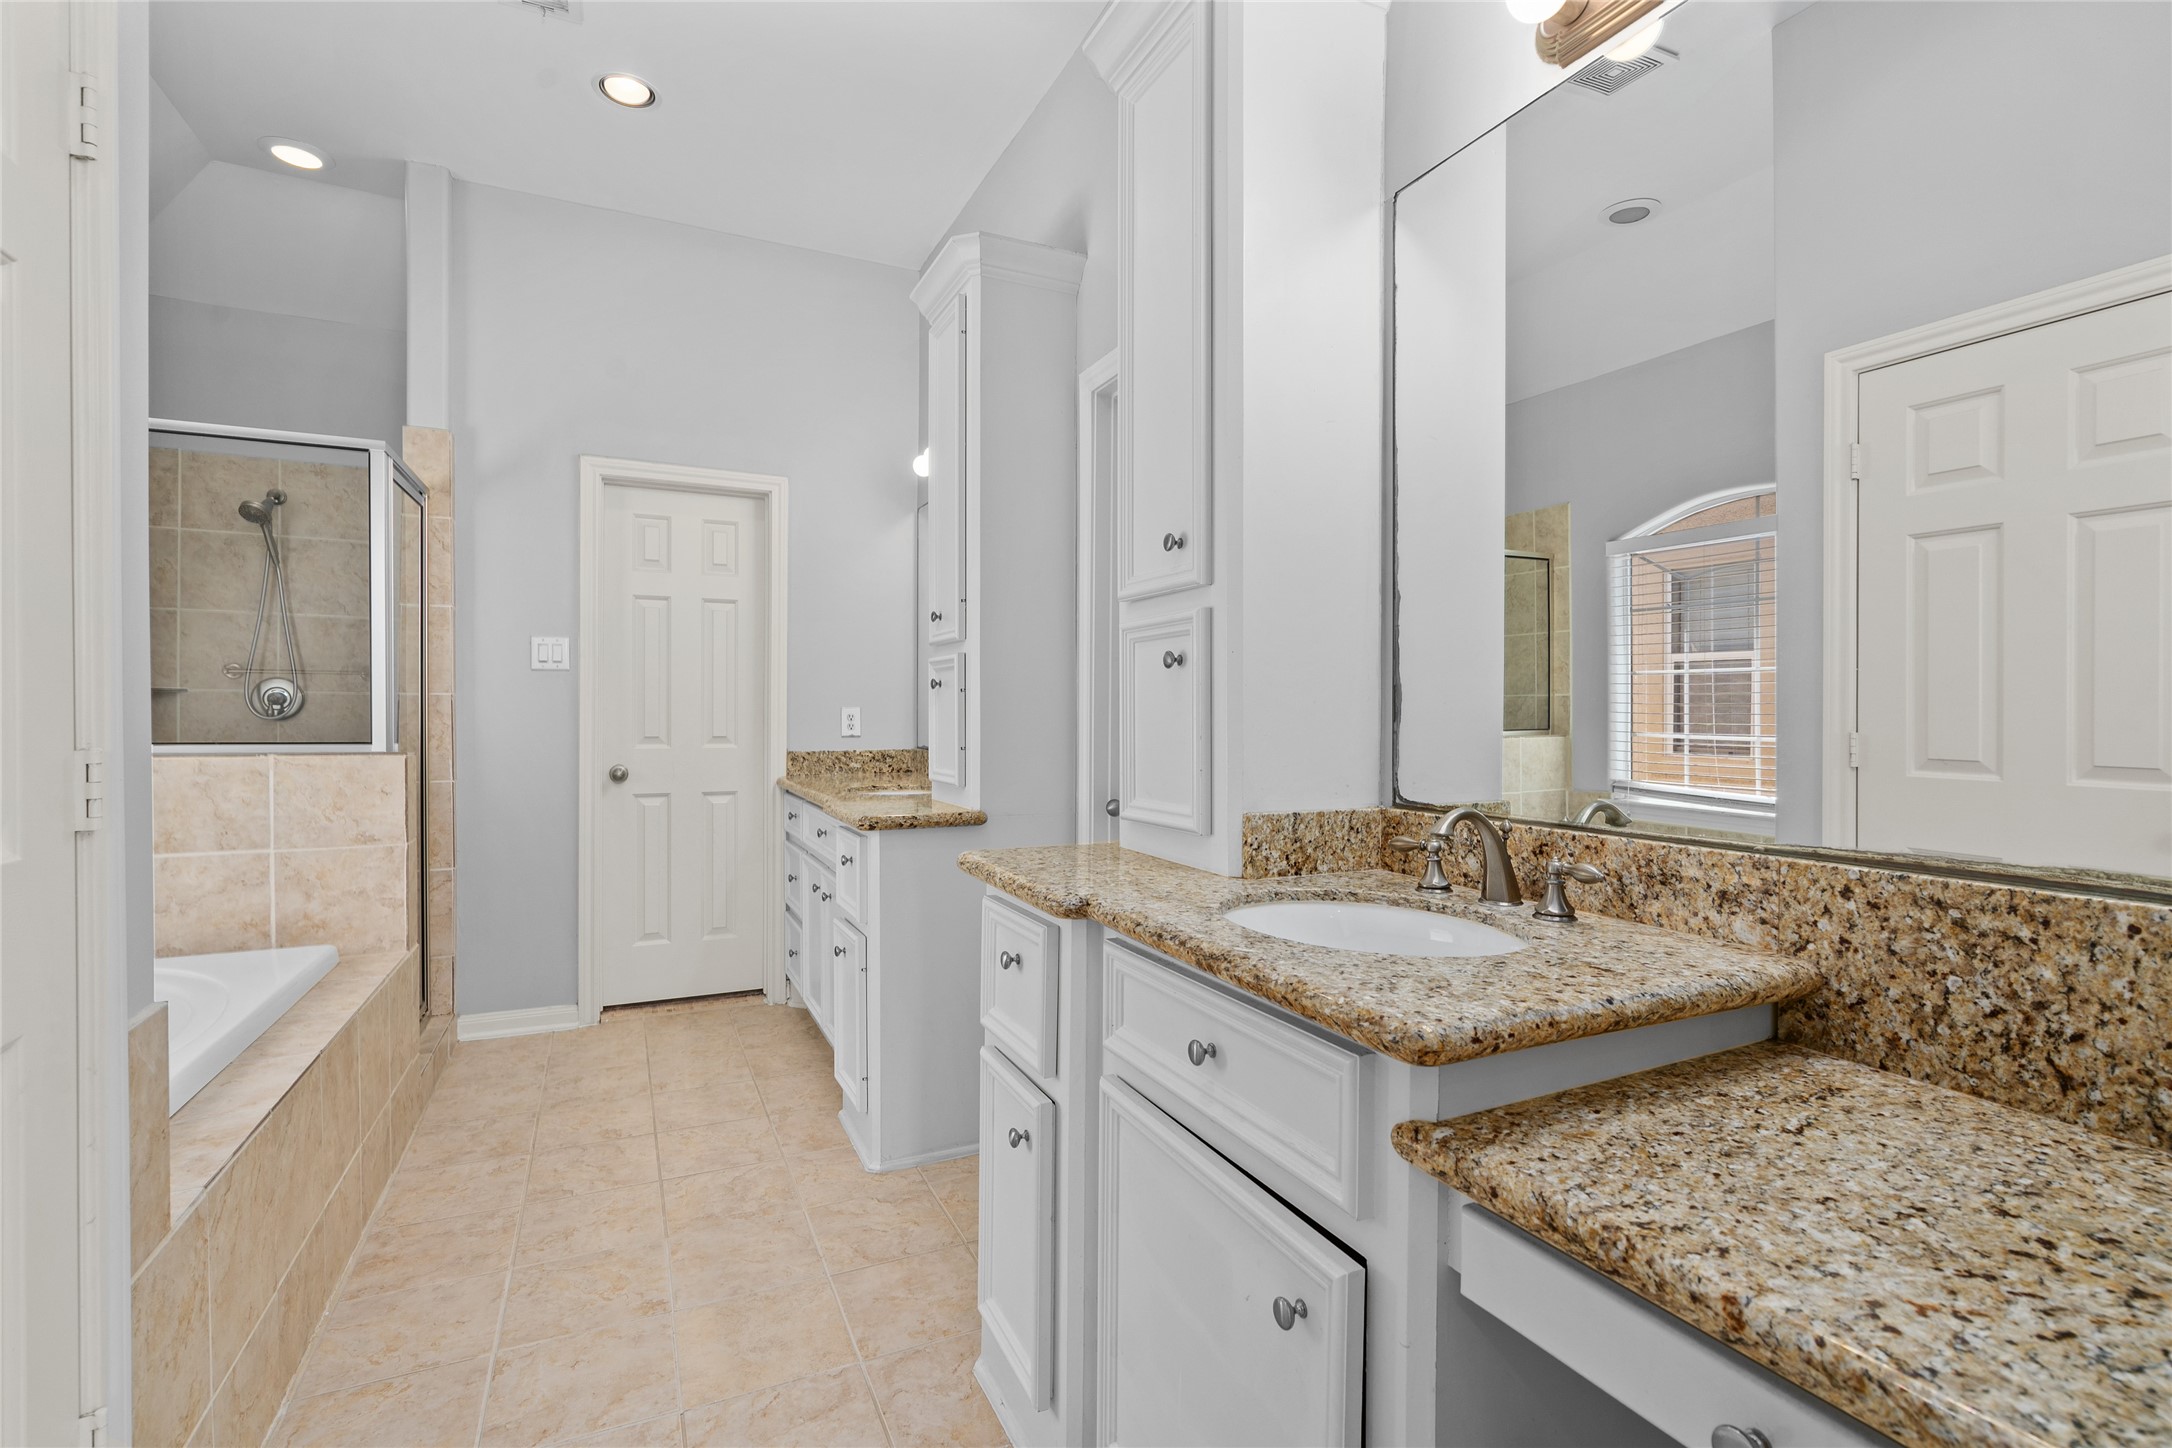 The primary bath room features dual vanities, jetted tub, separate shower, water closet and ample storage.